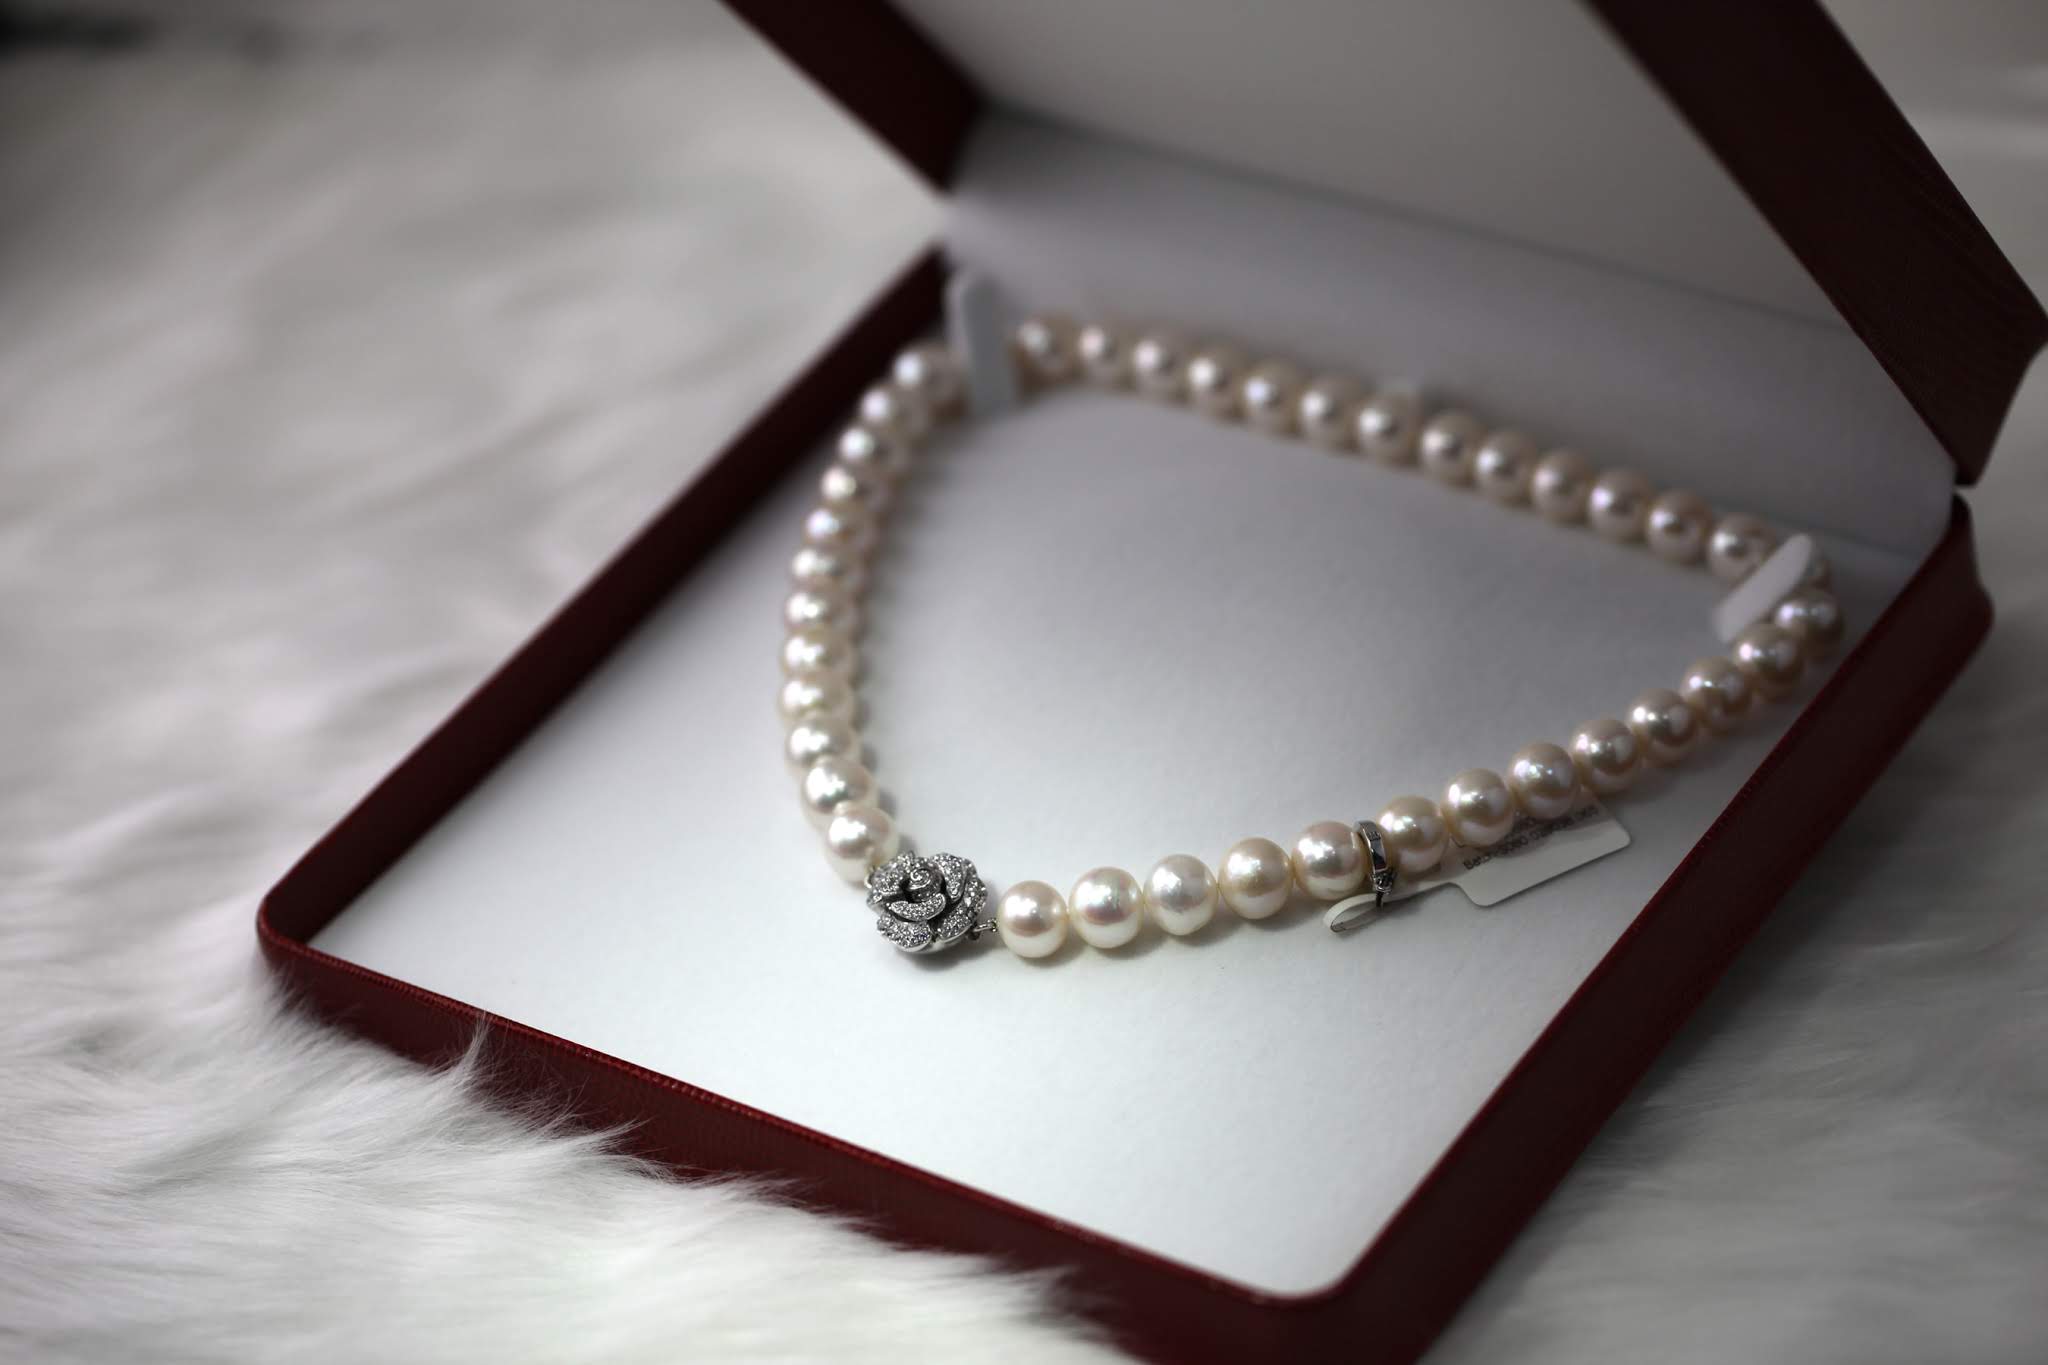 pearl necklace inside of an opened jewelry box